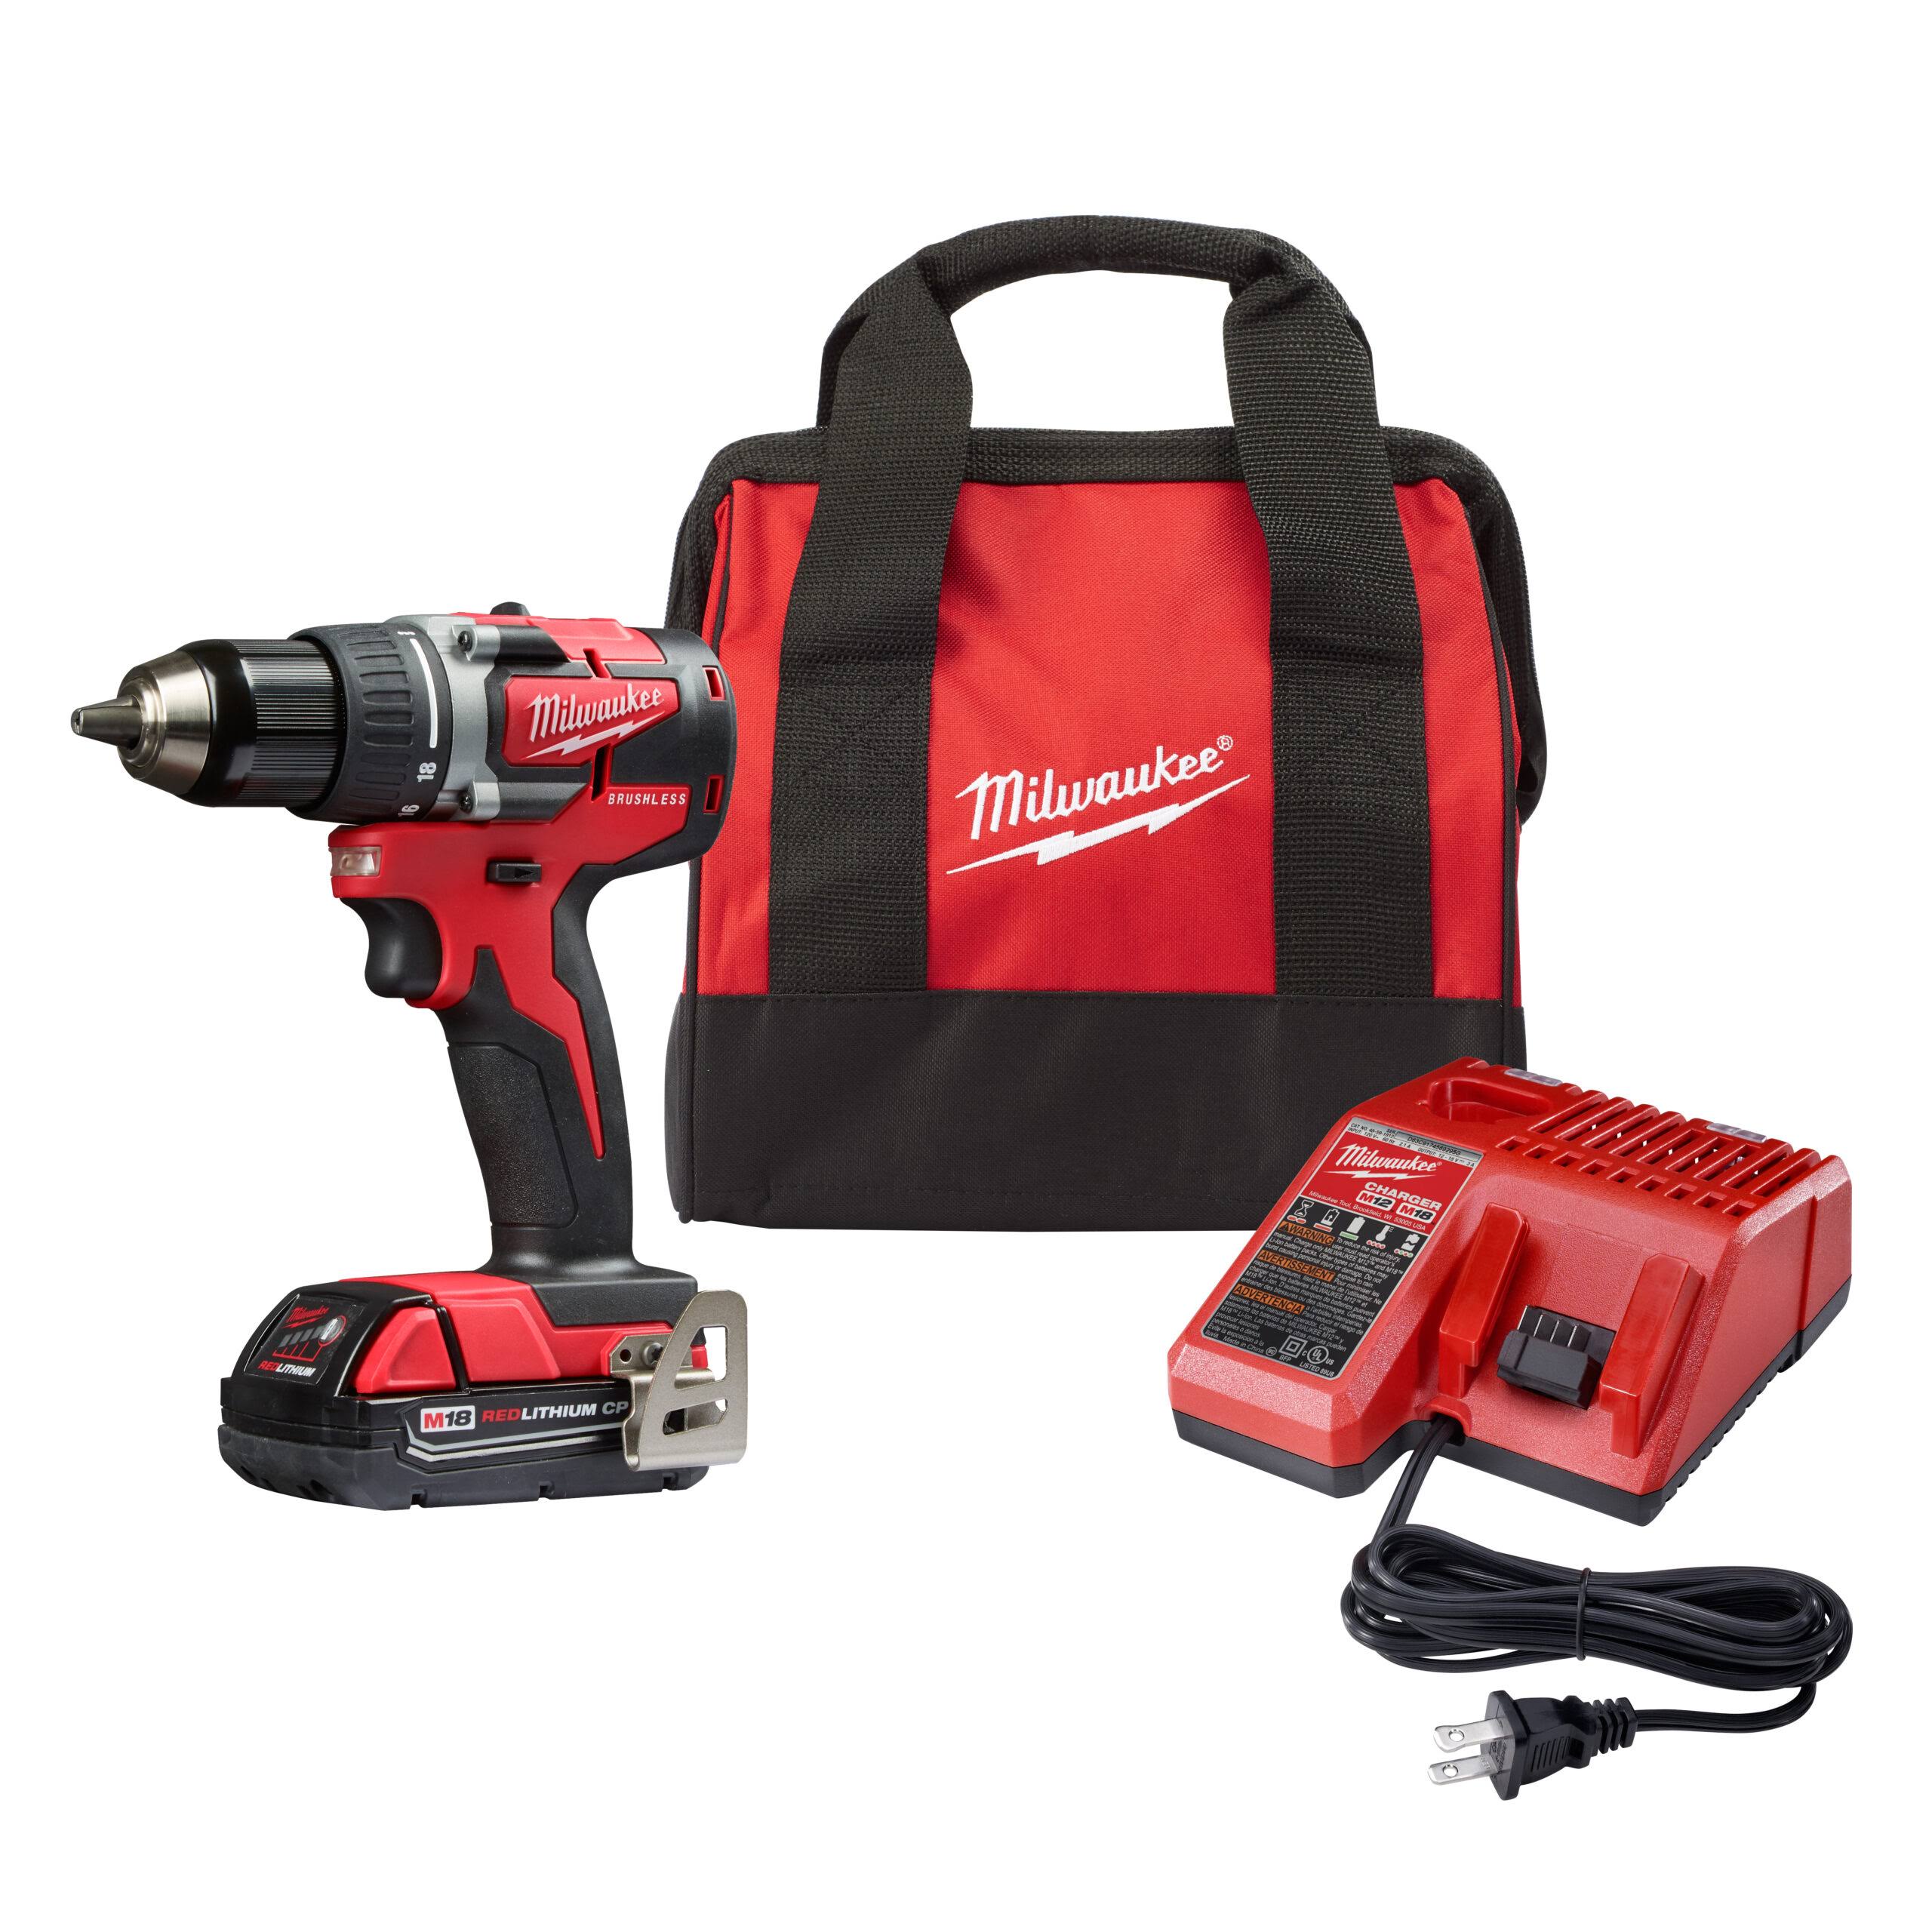 Milwaukee Lithium Ion Compact Brushless Cordless Drill Kit - 18v, 1/2"